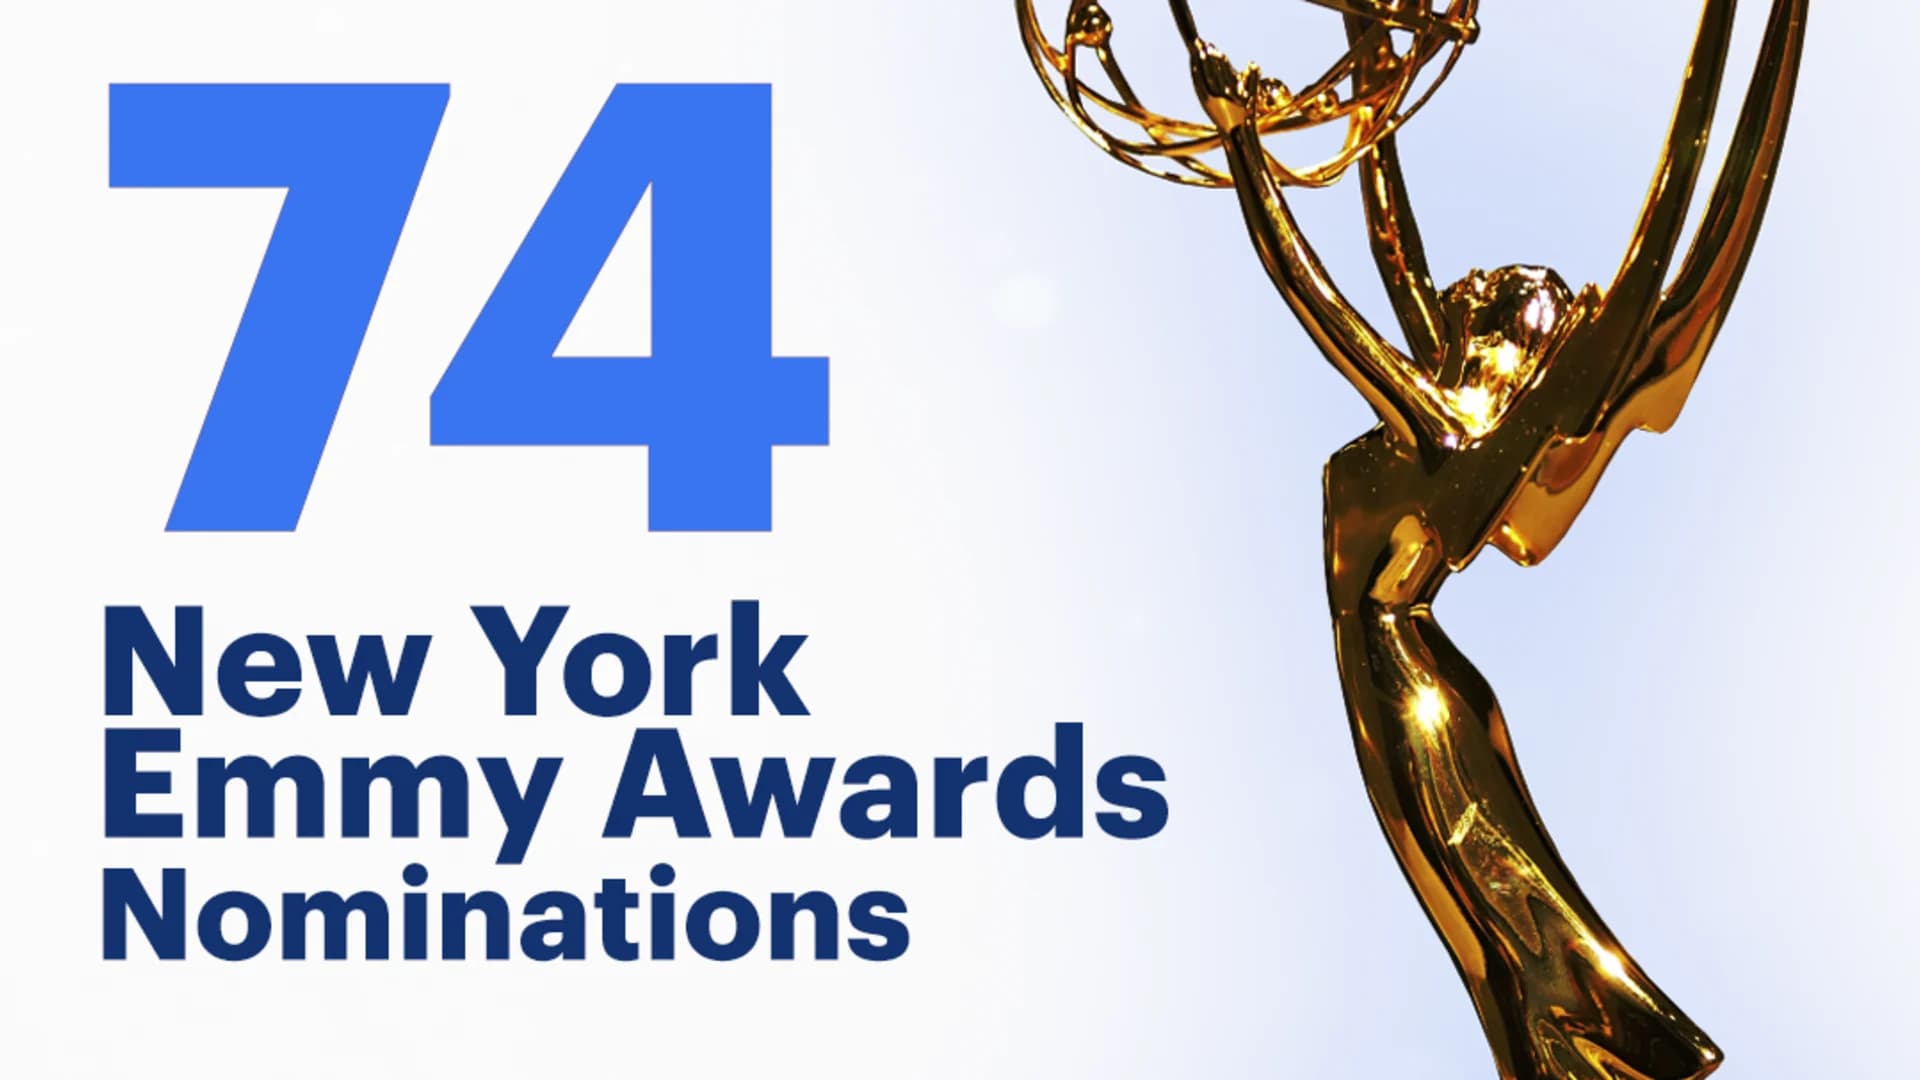 News 12 receives region-leading 74 Emmy nominations 